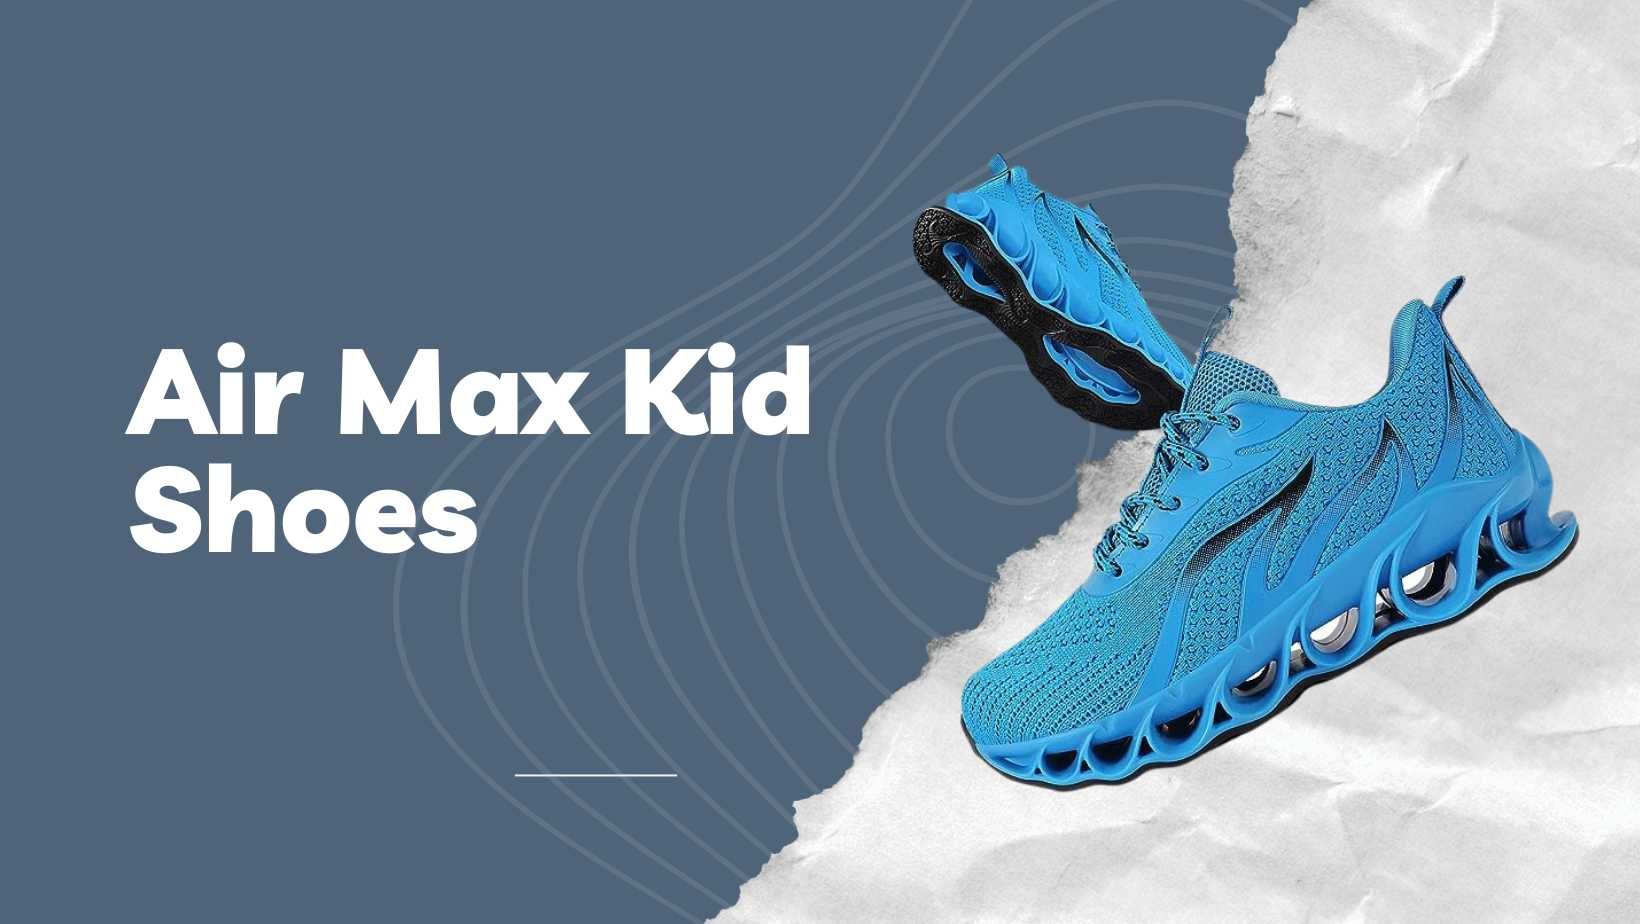 Air Max Kid Shoes: Providing Comfort and Style for Young Feet